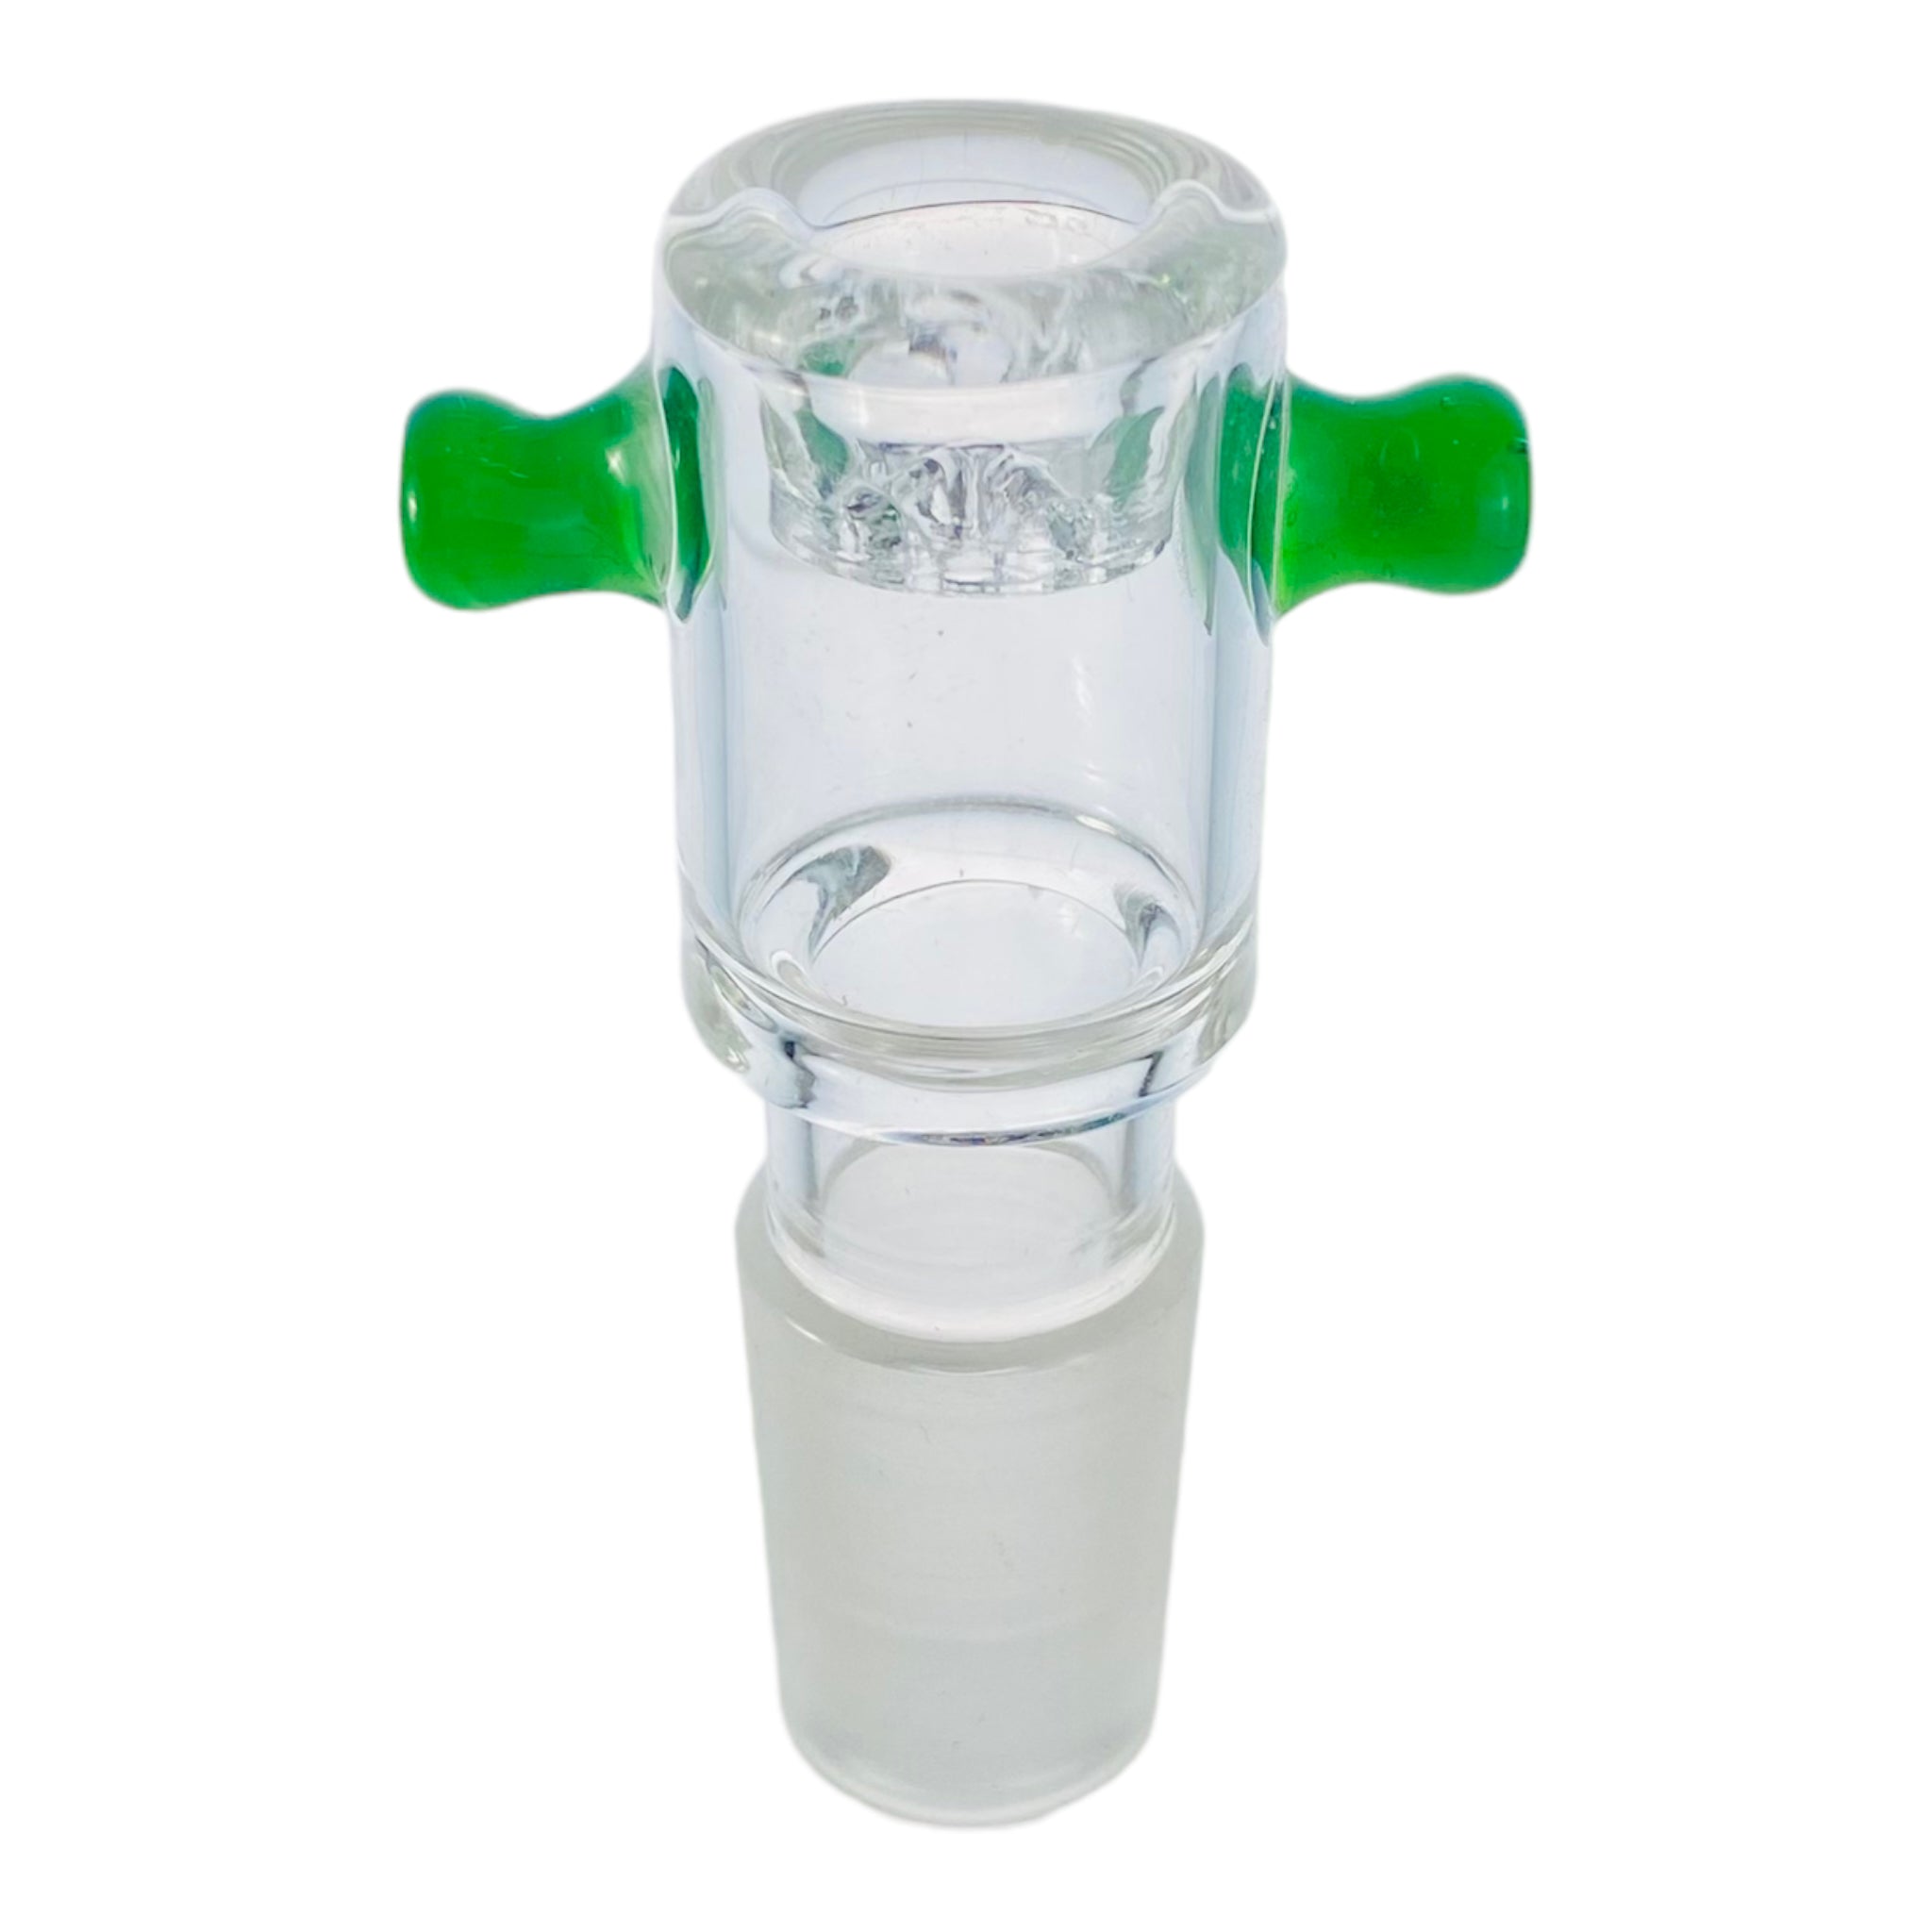 18mm Flower Bowl - Tall Clear Bubble With Built In Honeycomb Screen Bong Bowl Piece